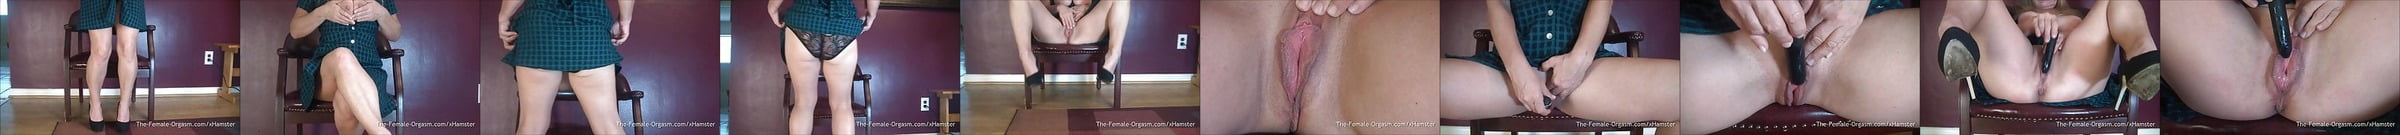 Mature MILFs Juicy Pussy And Clit Hopping Orgasm Closeup XHamster